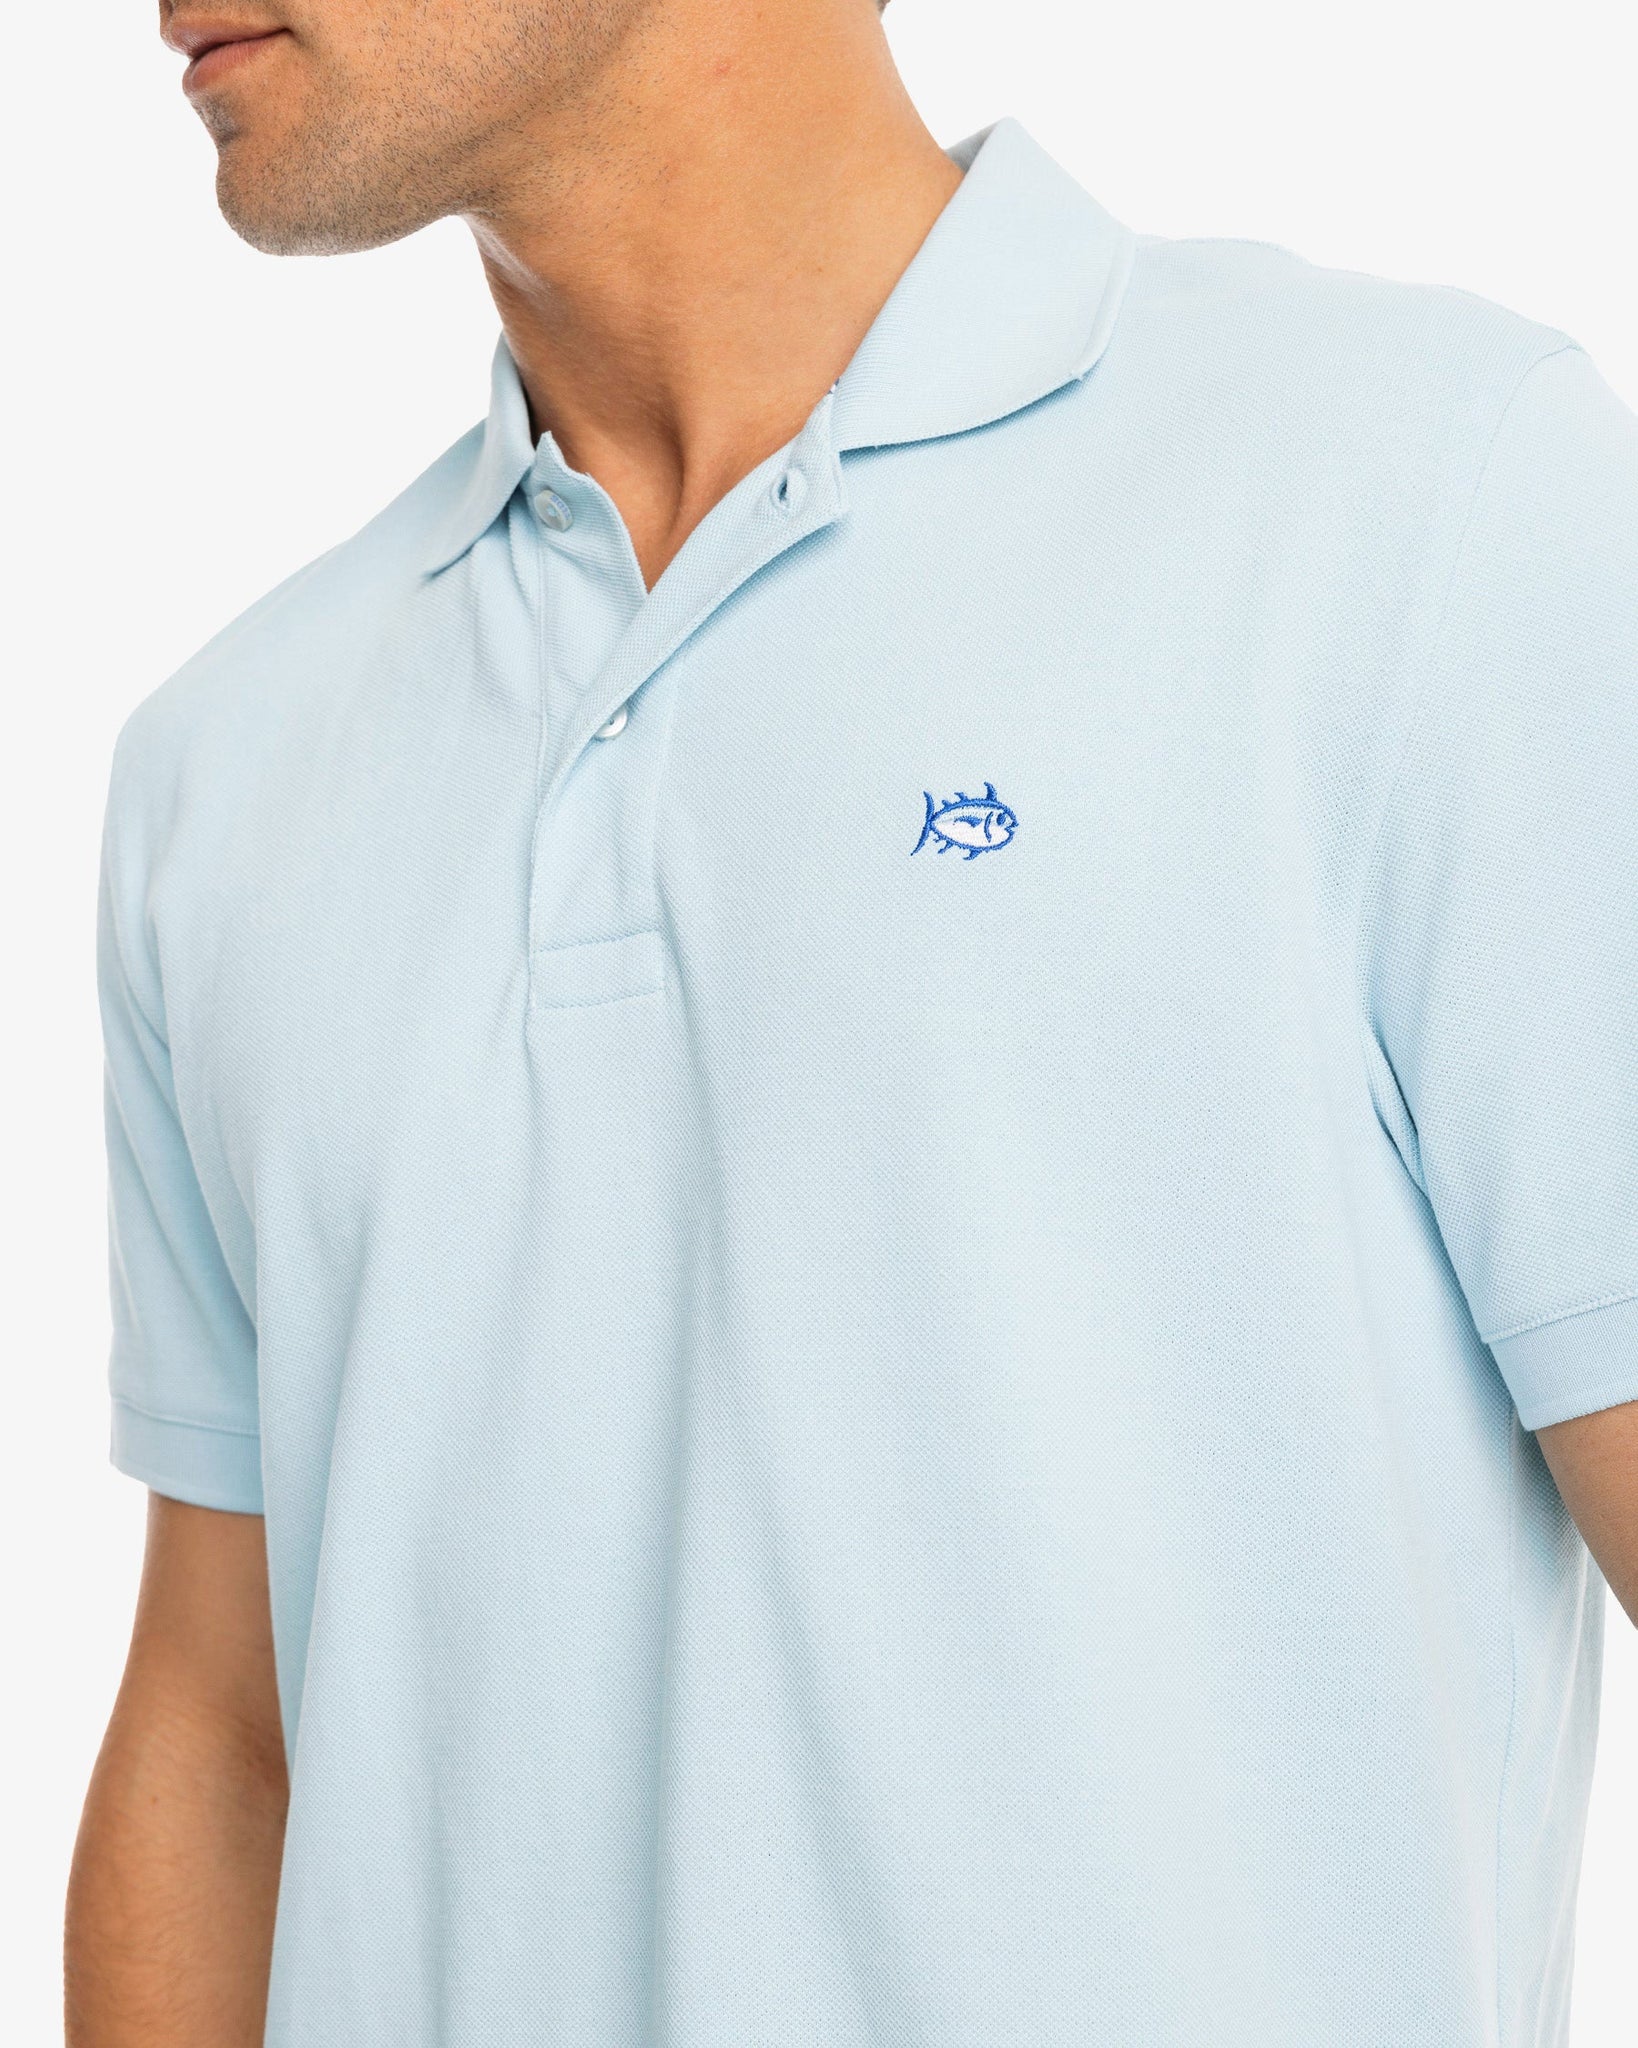 The model detail view of the Men's New Skipjack Polo Shirt by Southern Tide - Aquamarine